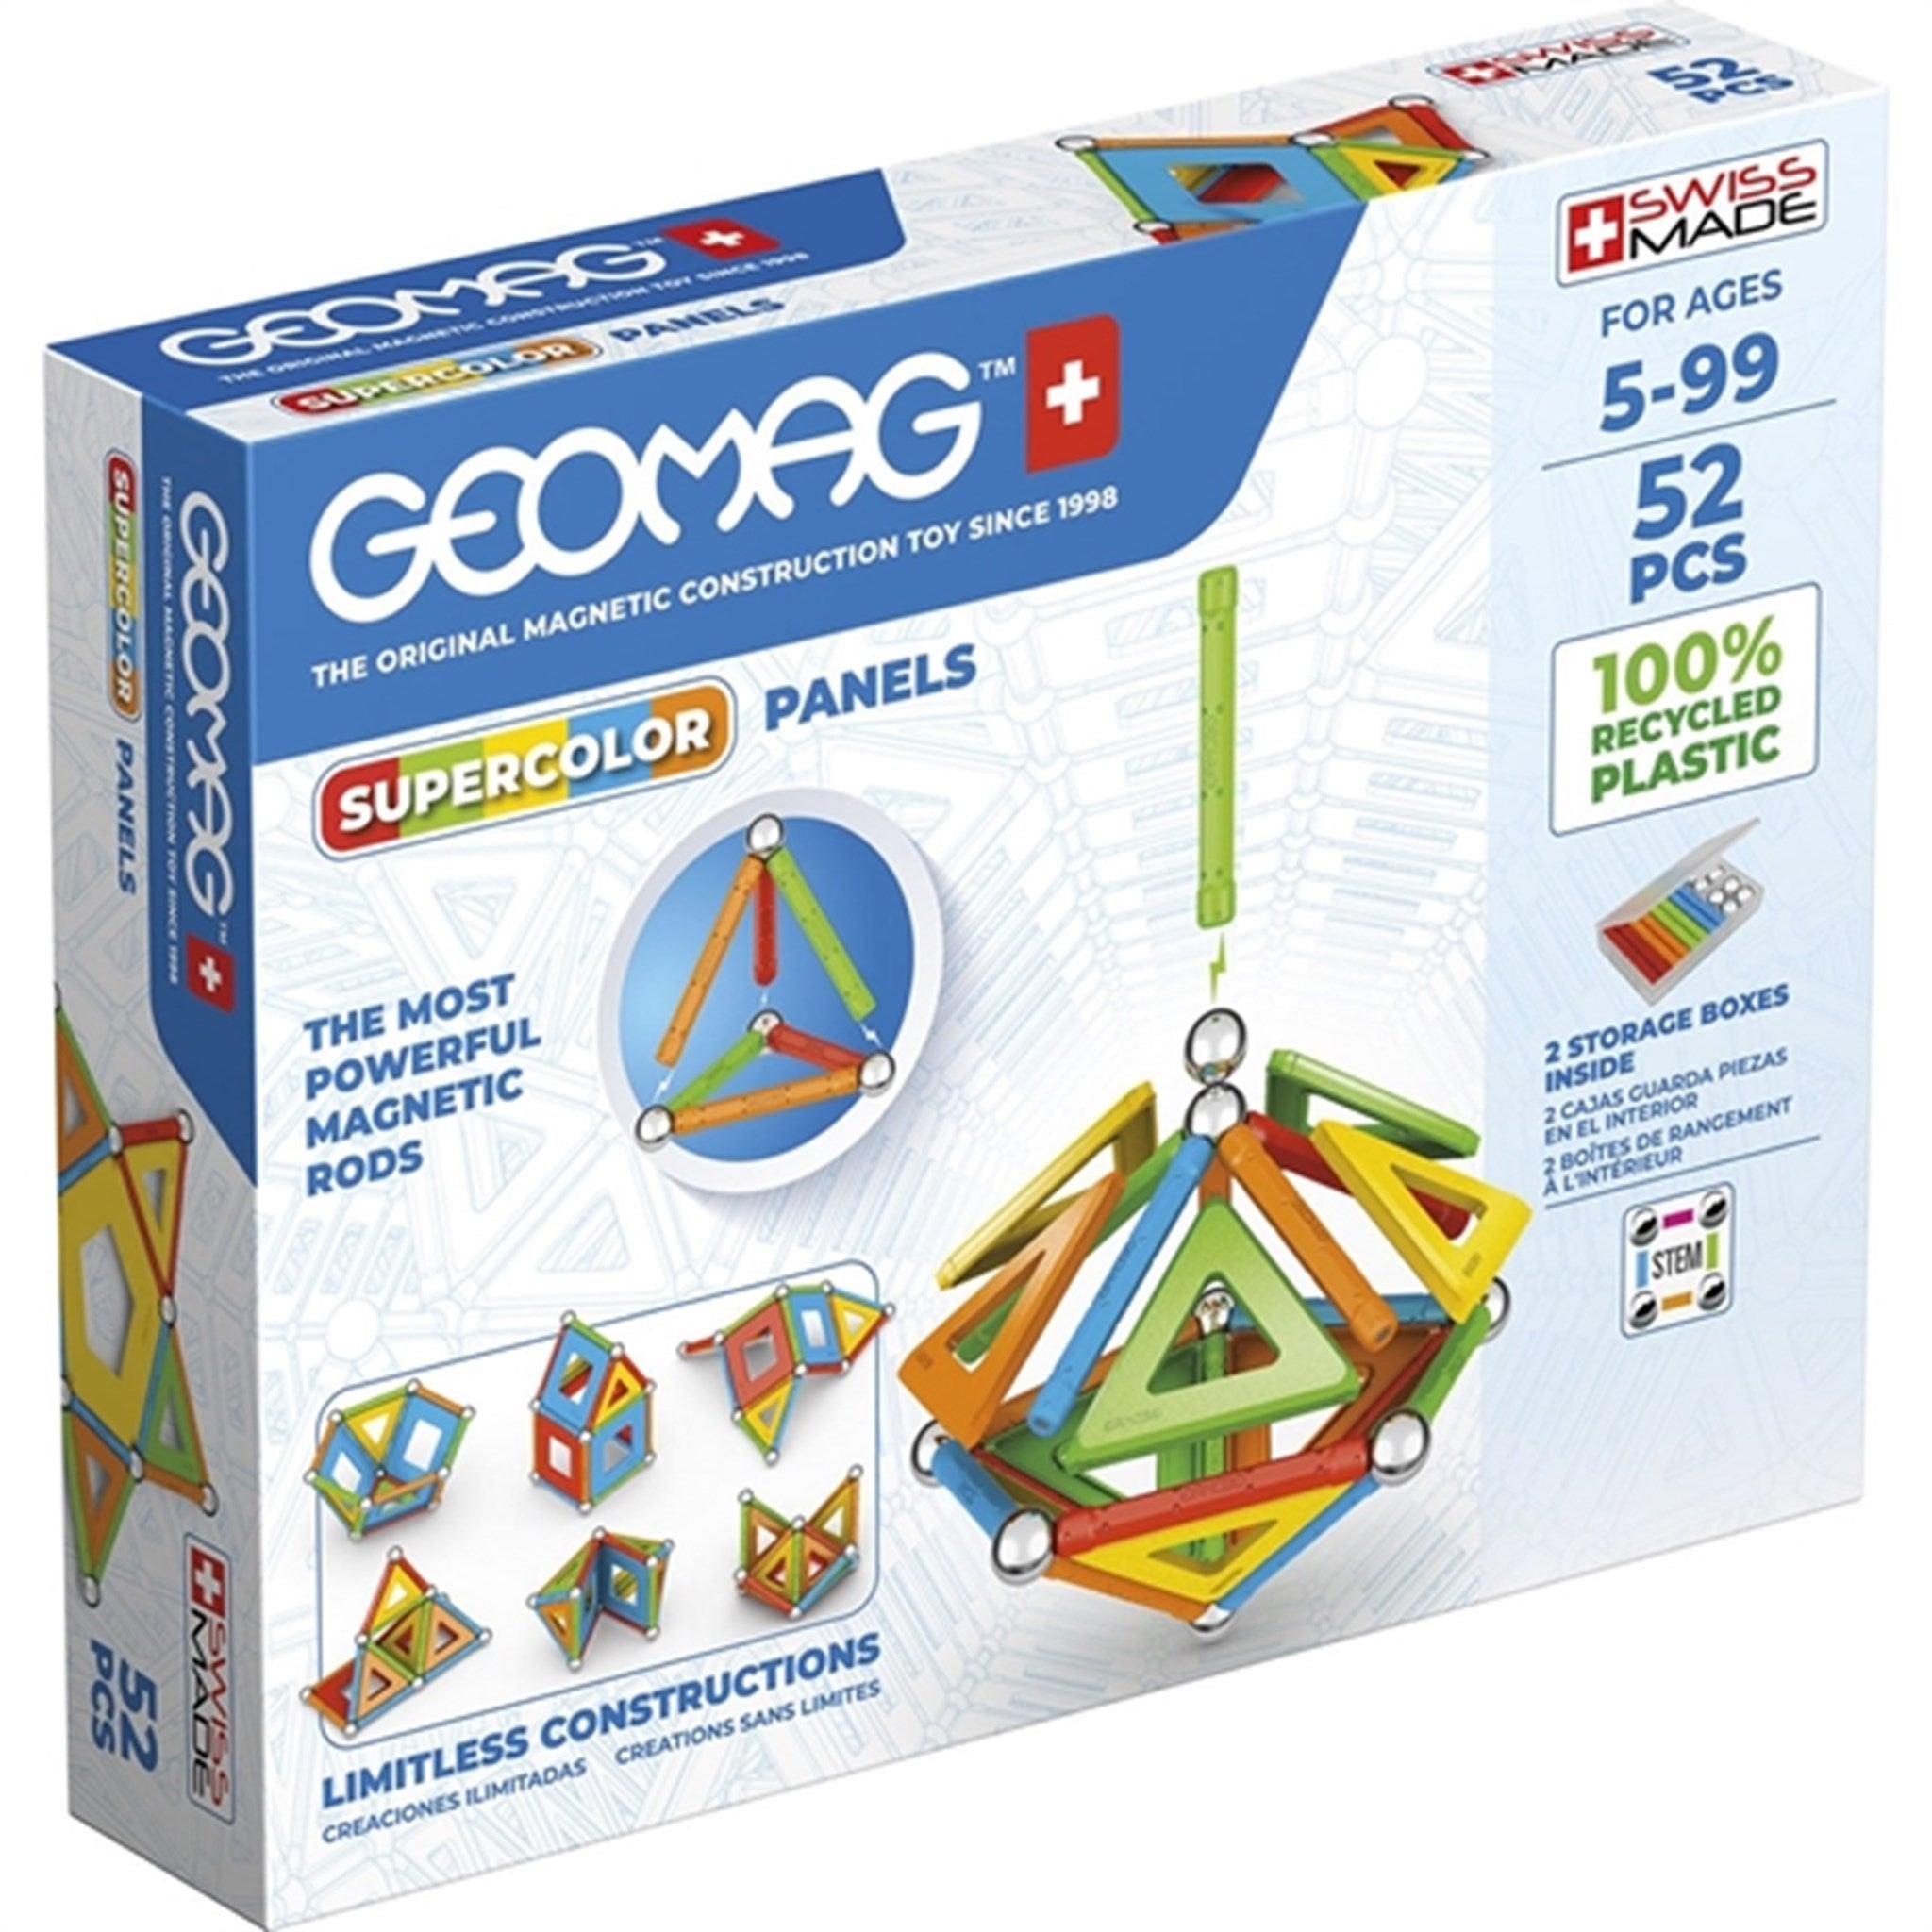 Geomag Supercolor Panels Recycled 52 stk